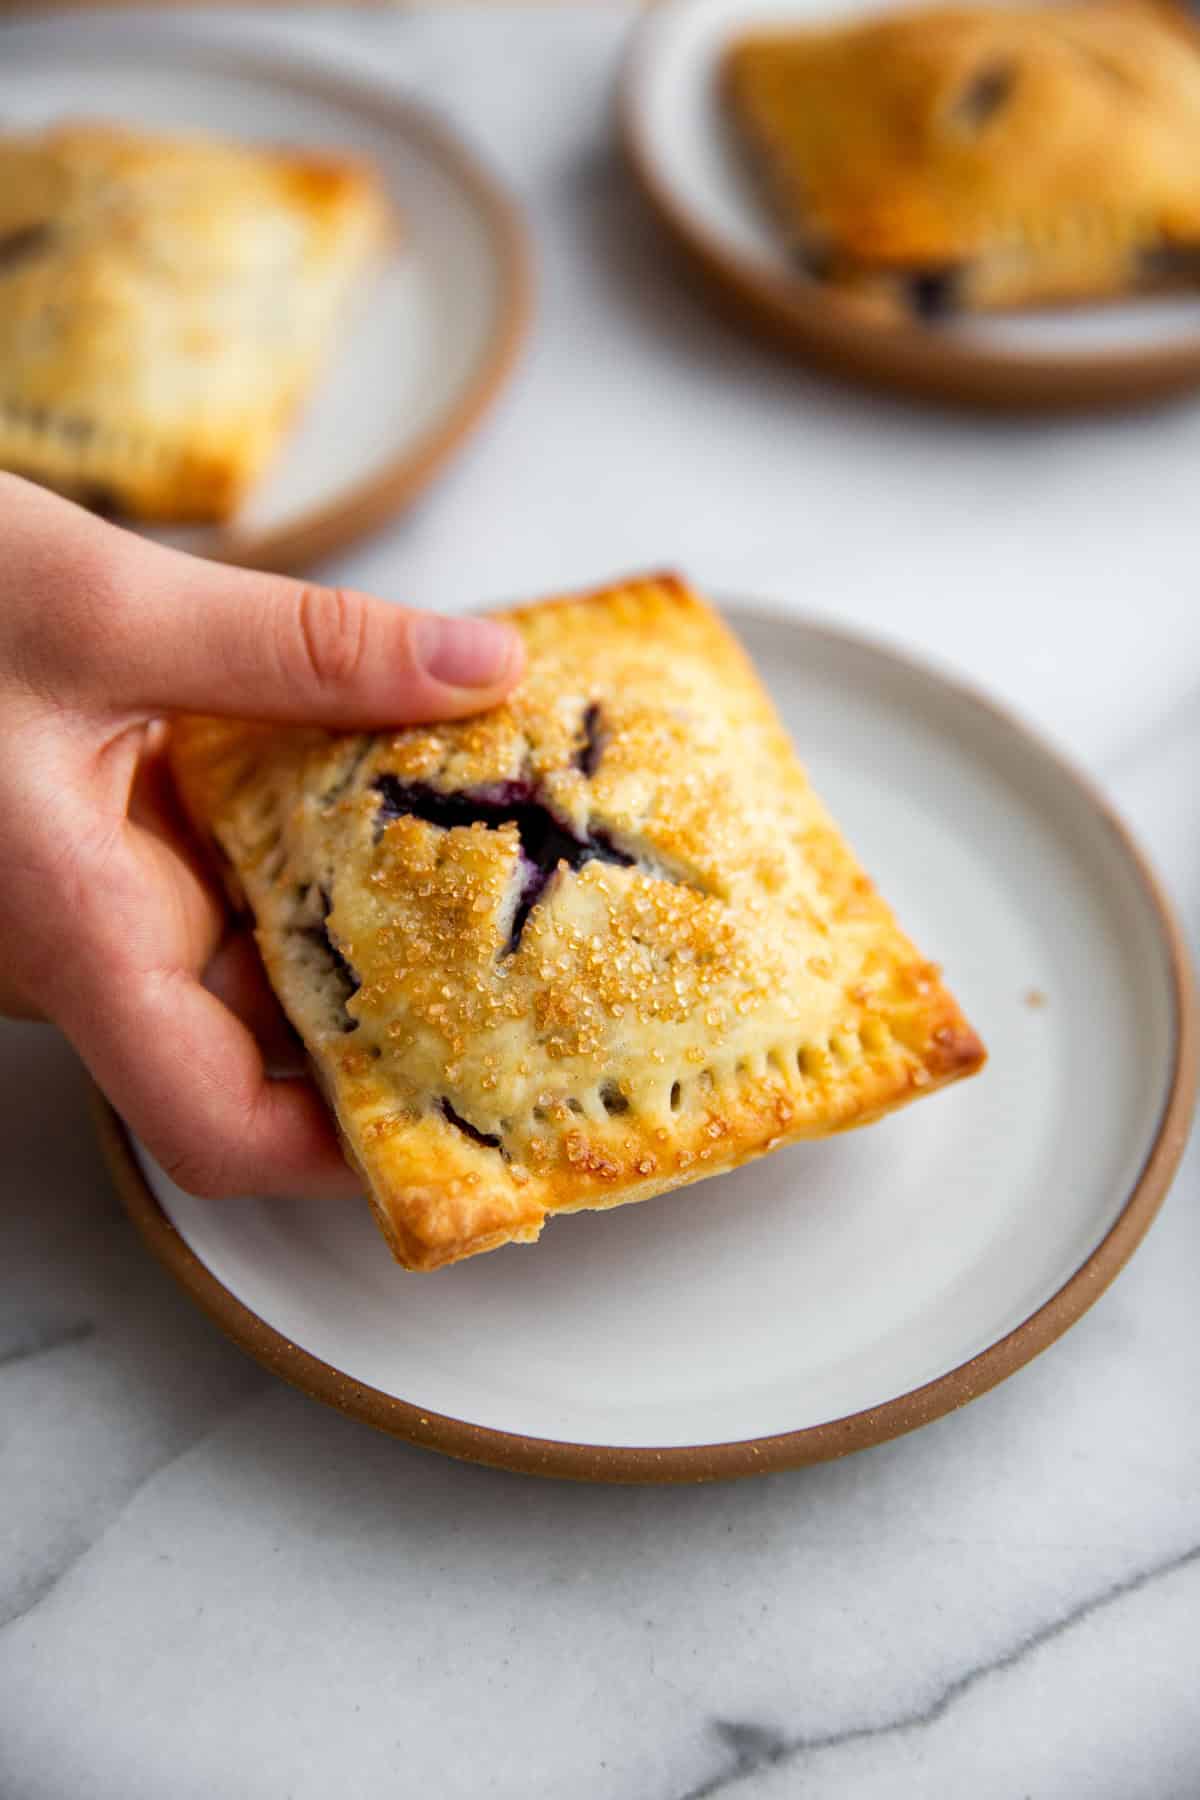 a hand holding a blueberry hand pie over a white plate